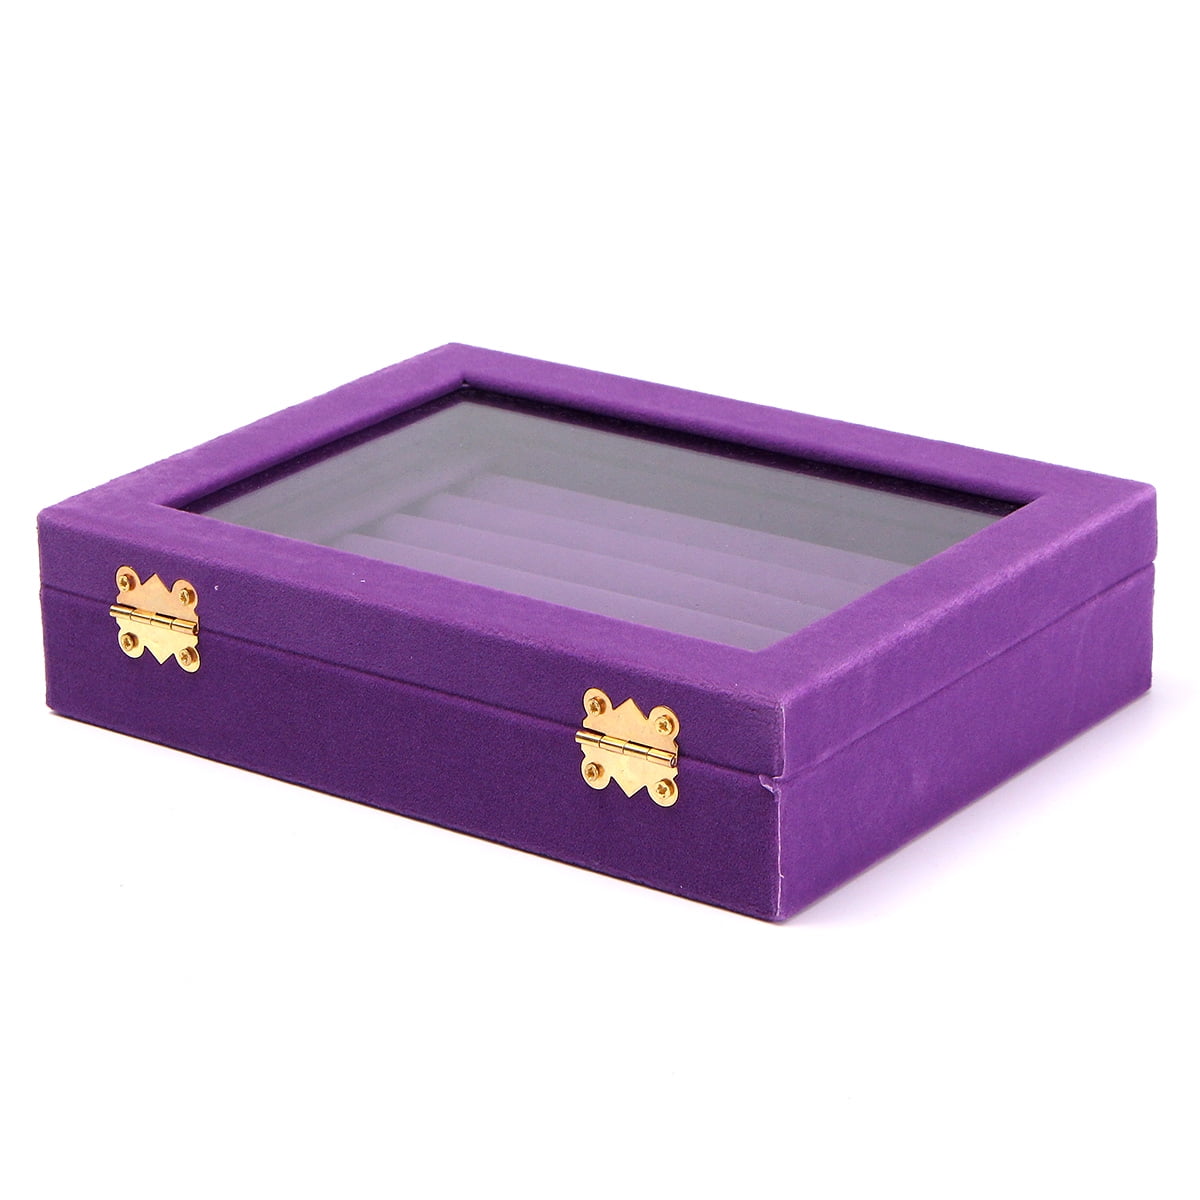 Details about   Velvet Ring Display Tray Case Counter Top Jewelry Holder Organizer Container 